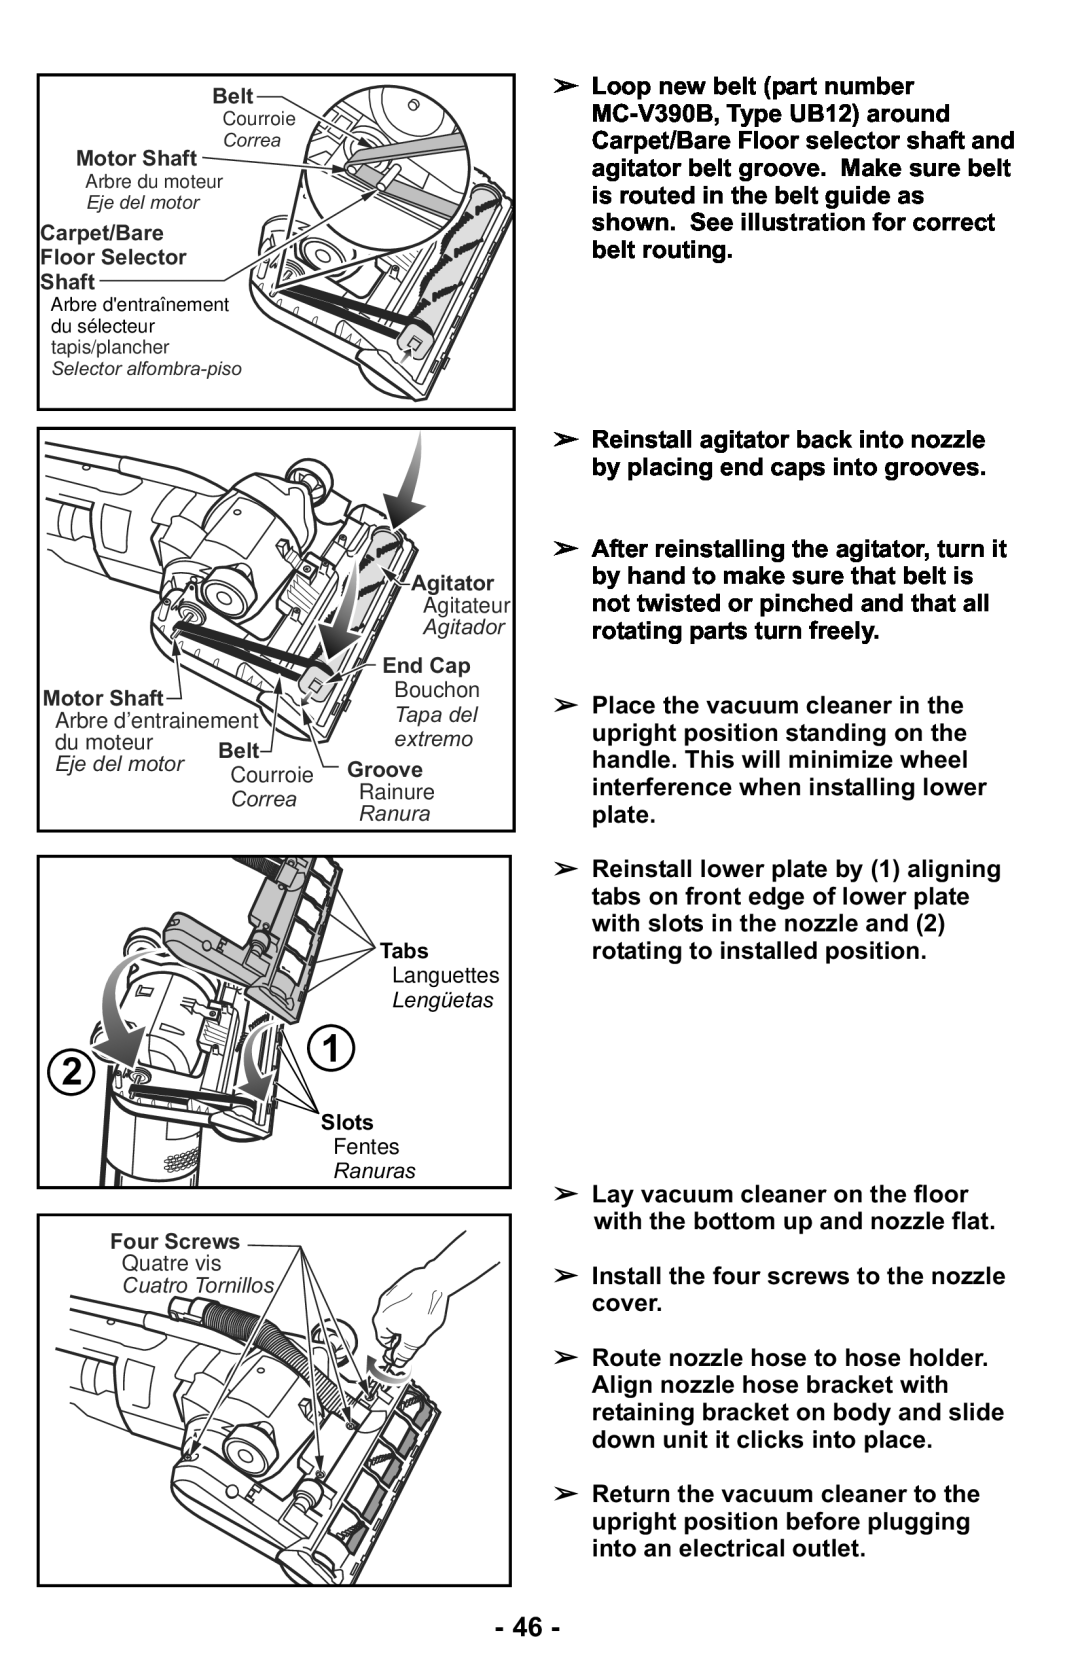 Panasonic MC-UL427 operating instructions Install the four screws to the nozzle cover 